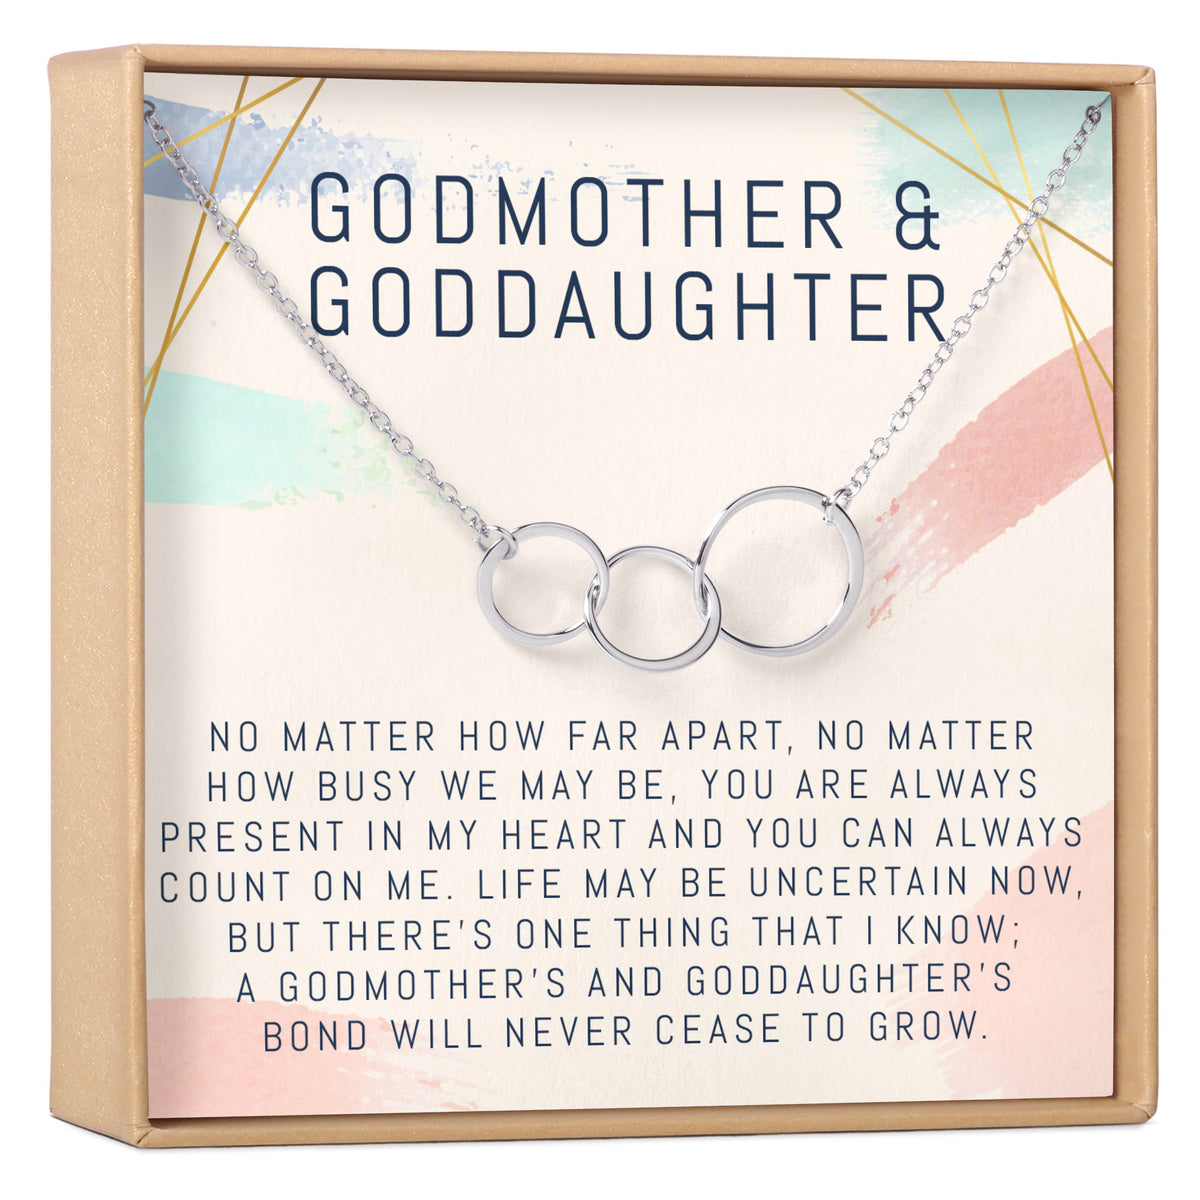 Godmother &amp; Goddaughter Necklace, Multiple Styles Necklace